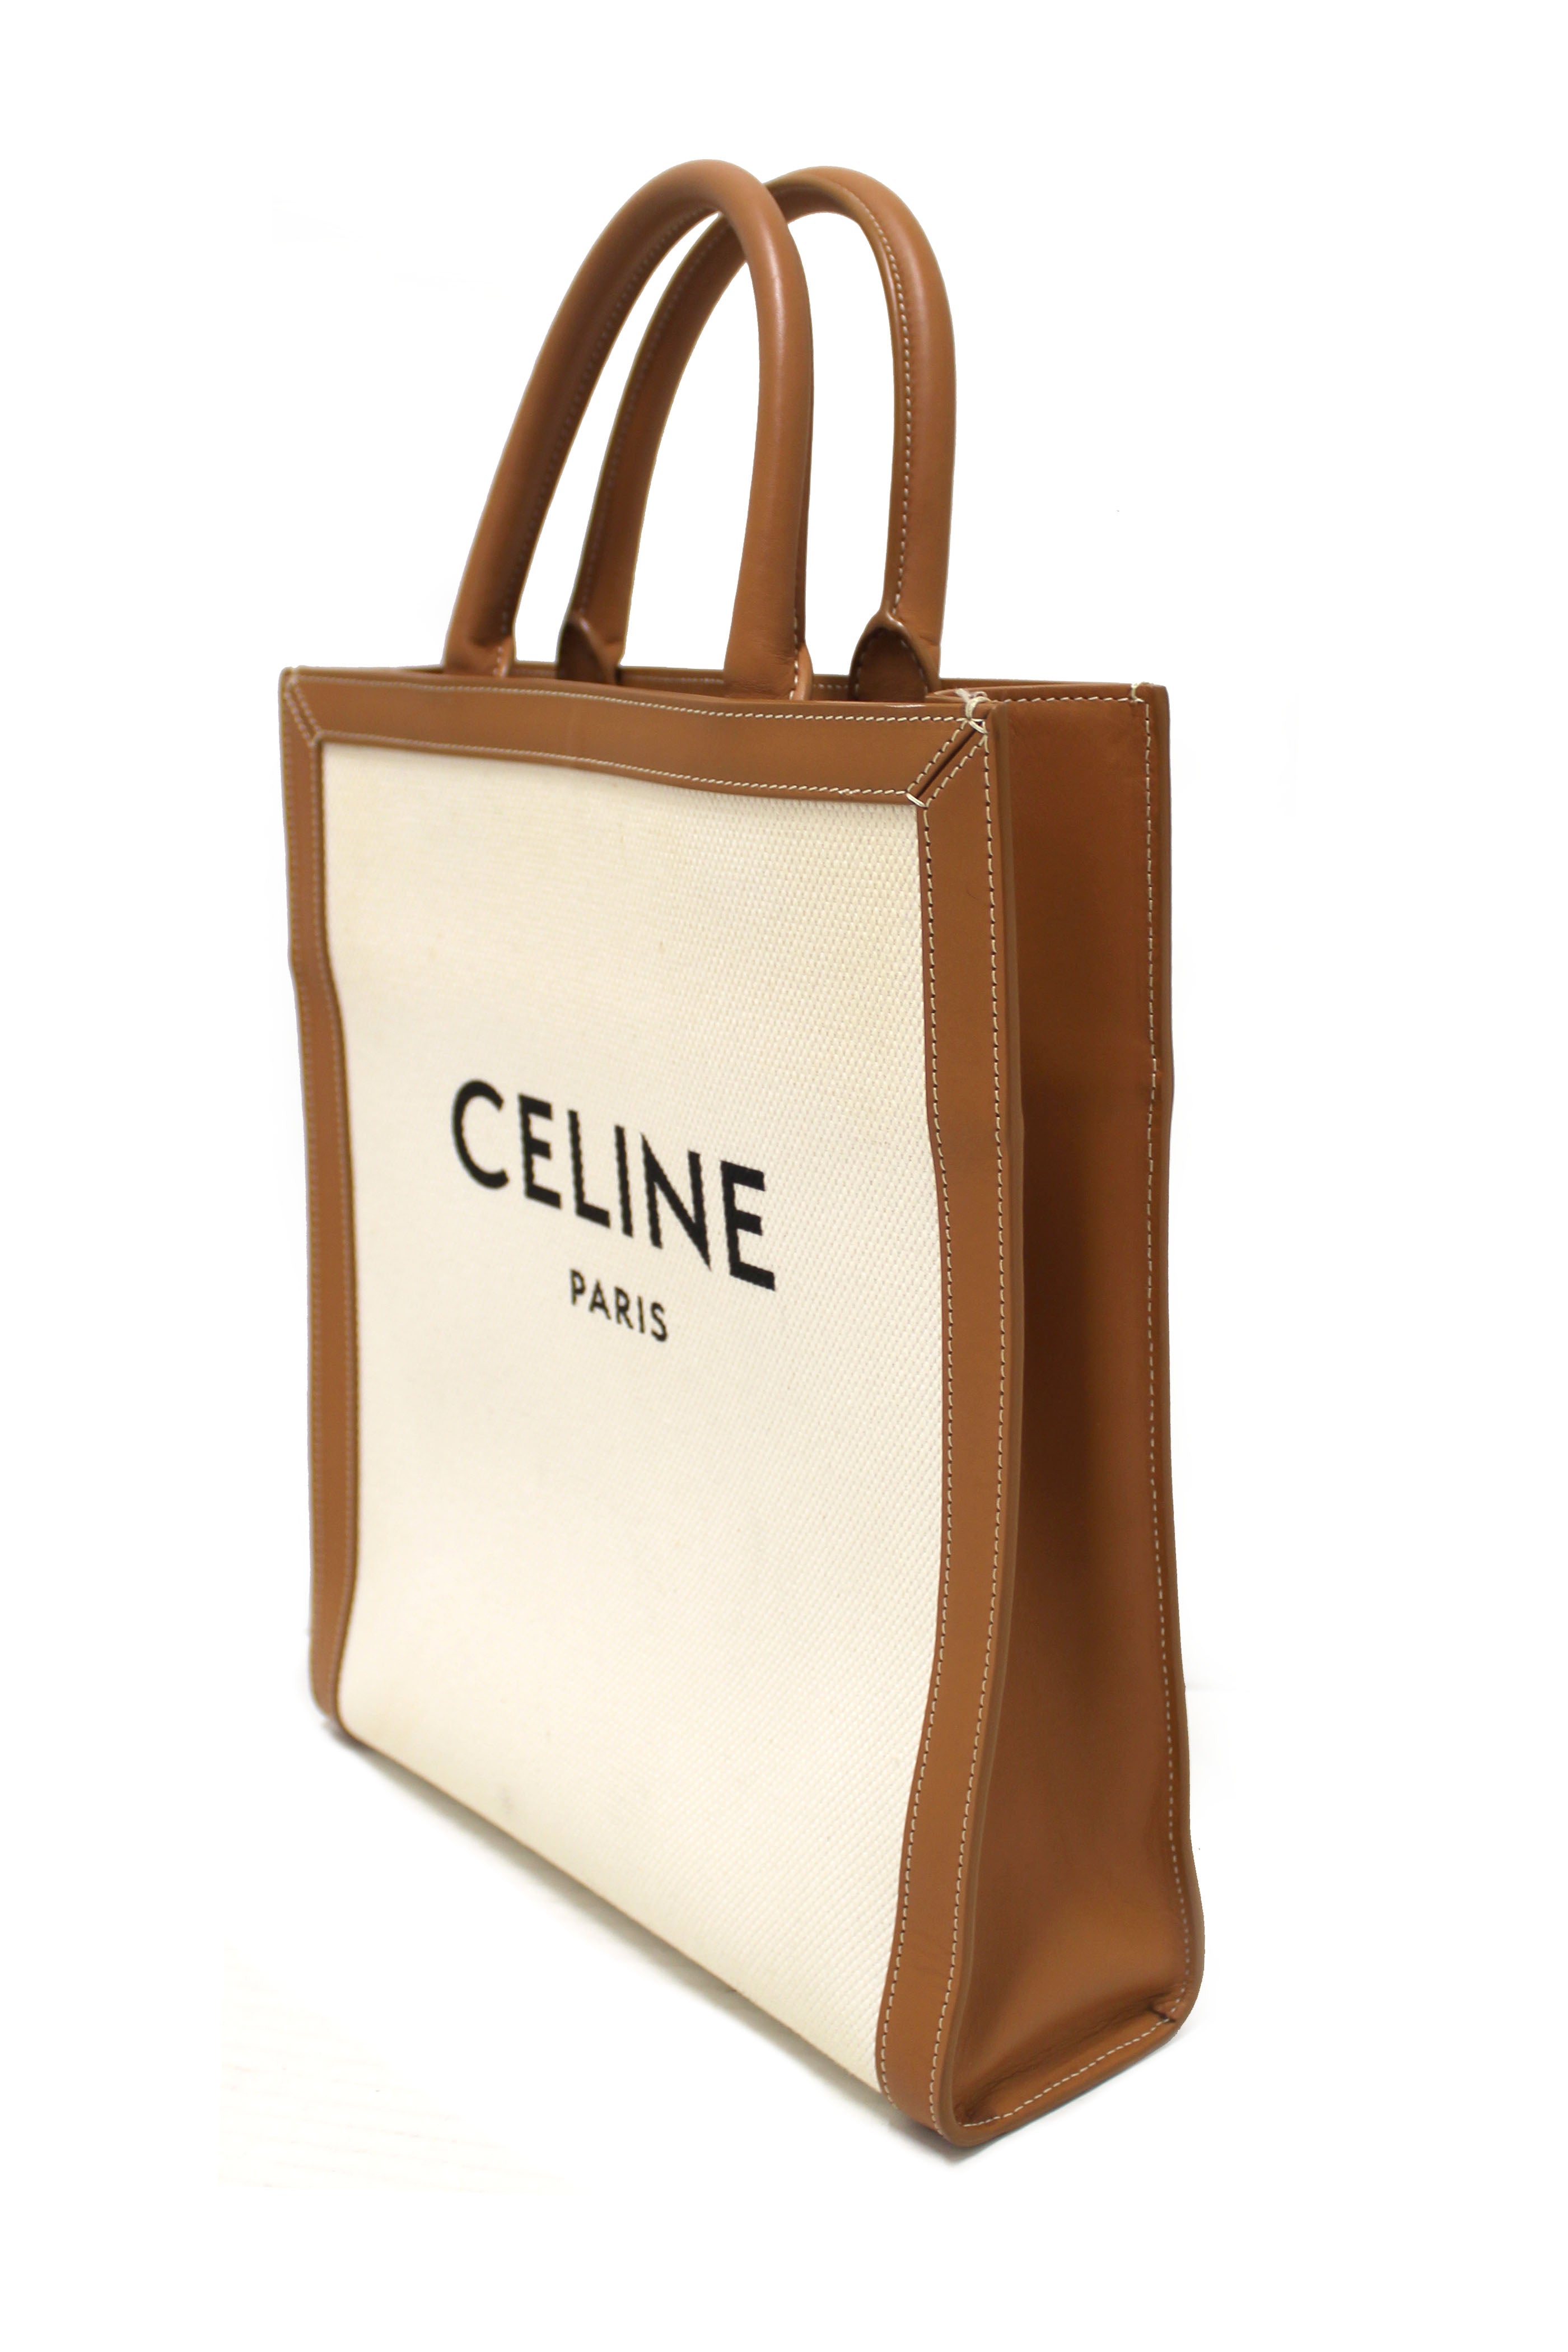 Celine small Vertical Cabas Canvas with celine print and calfskin